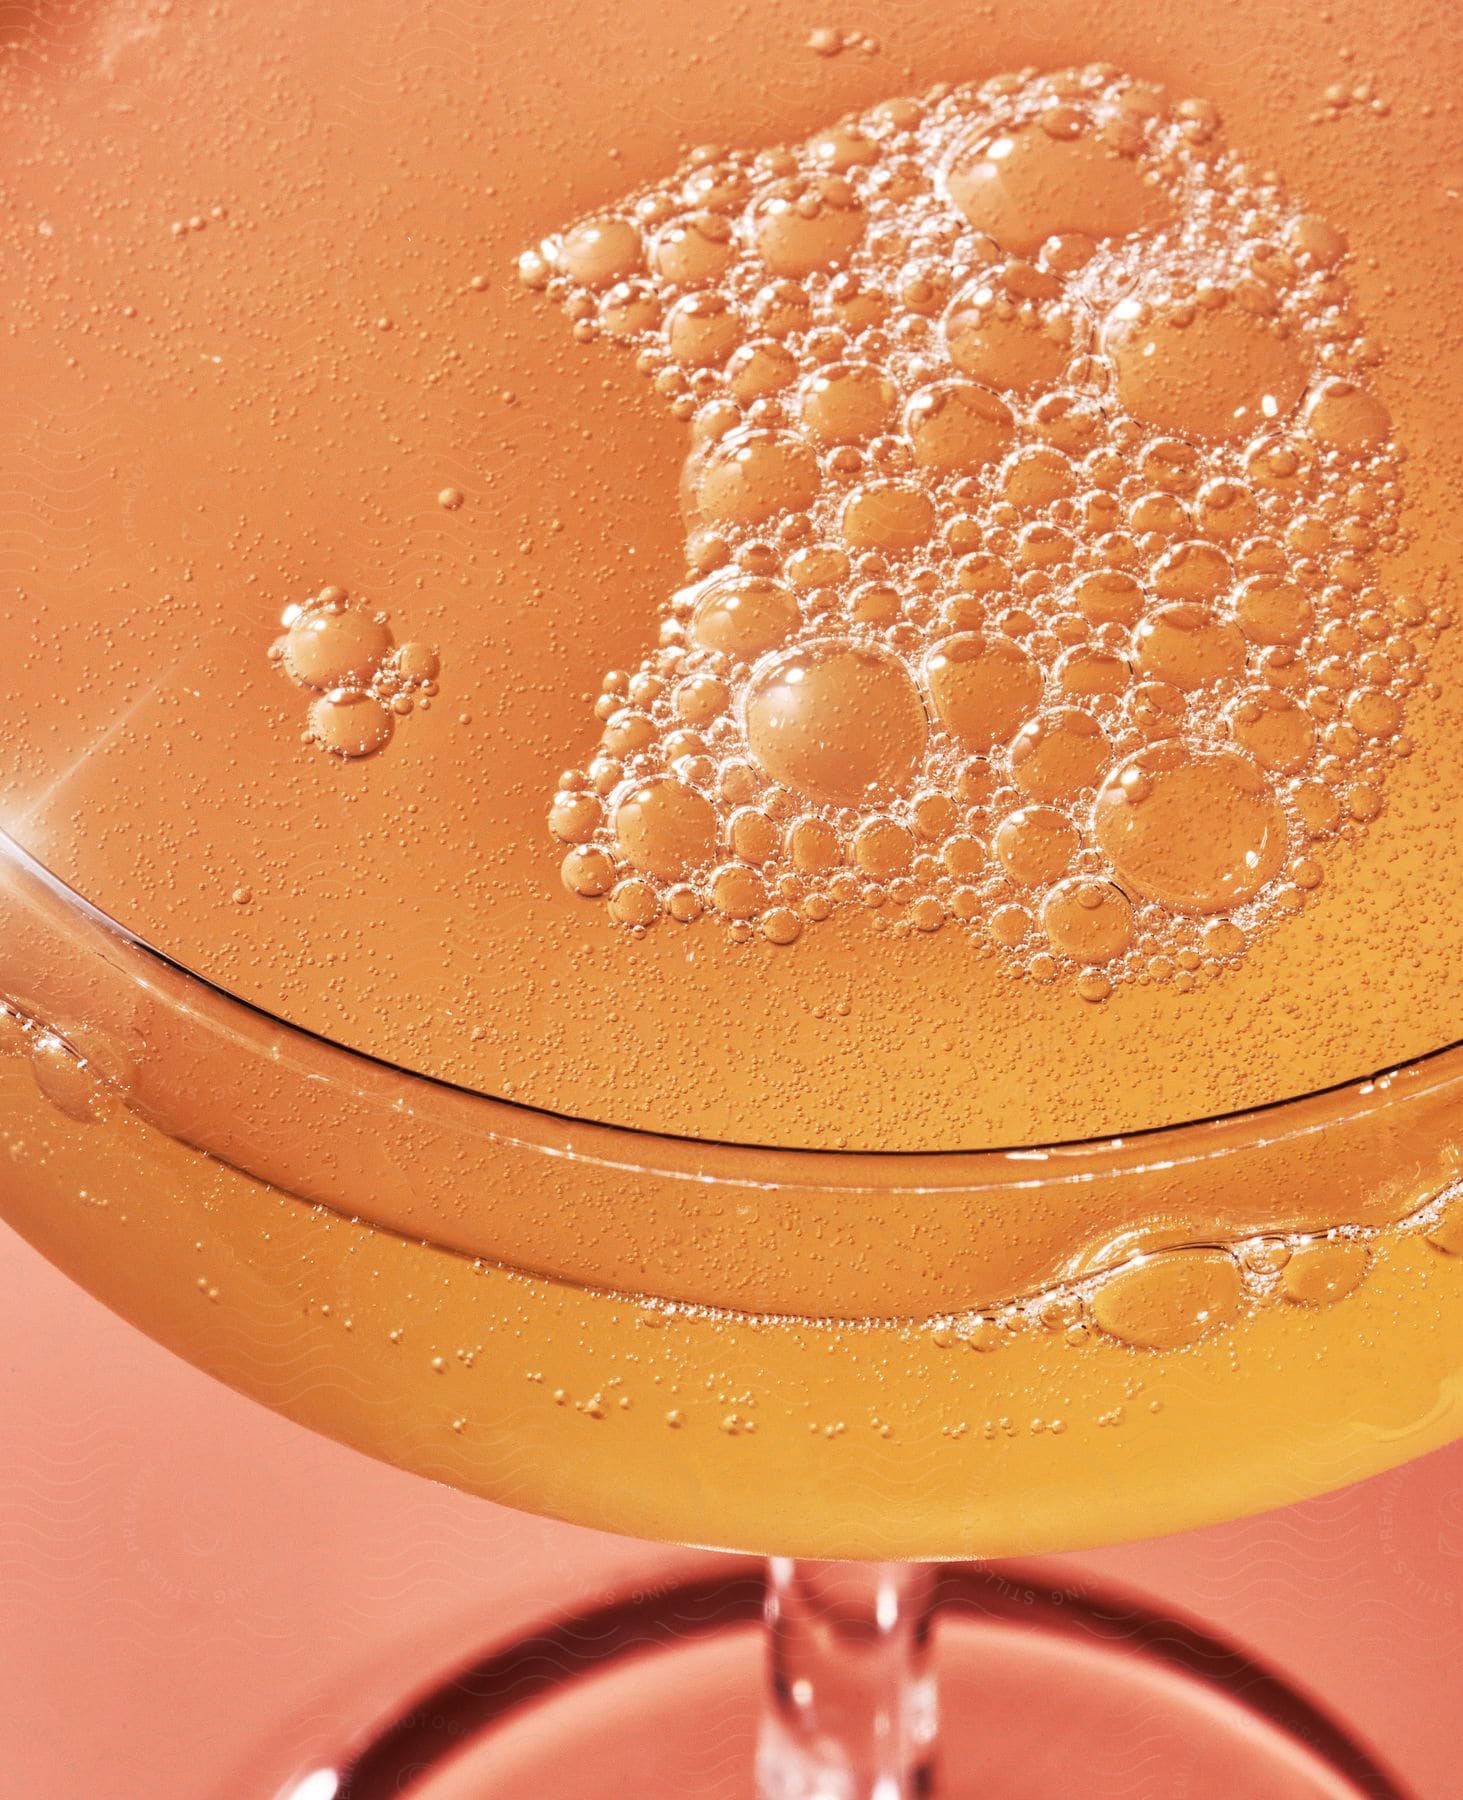 A glass of beverage with bubbles on top